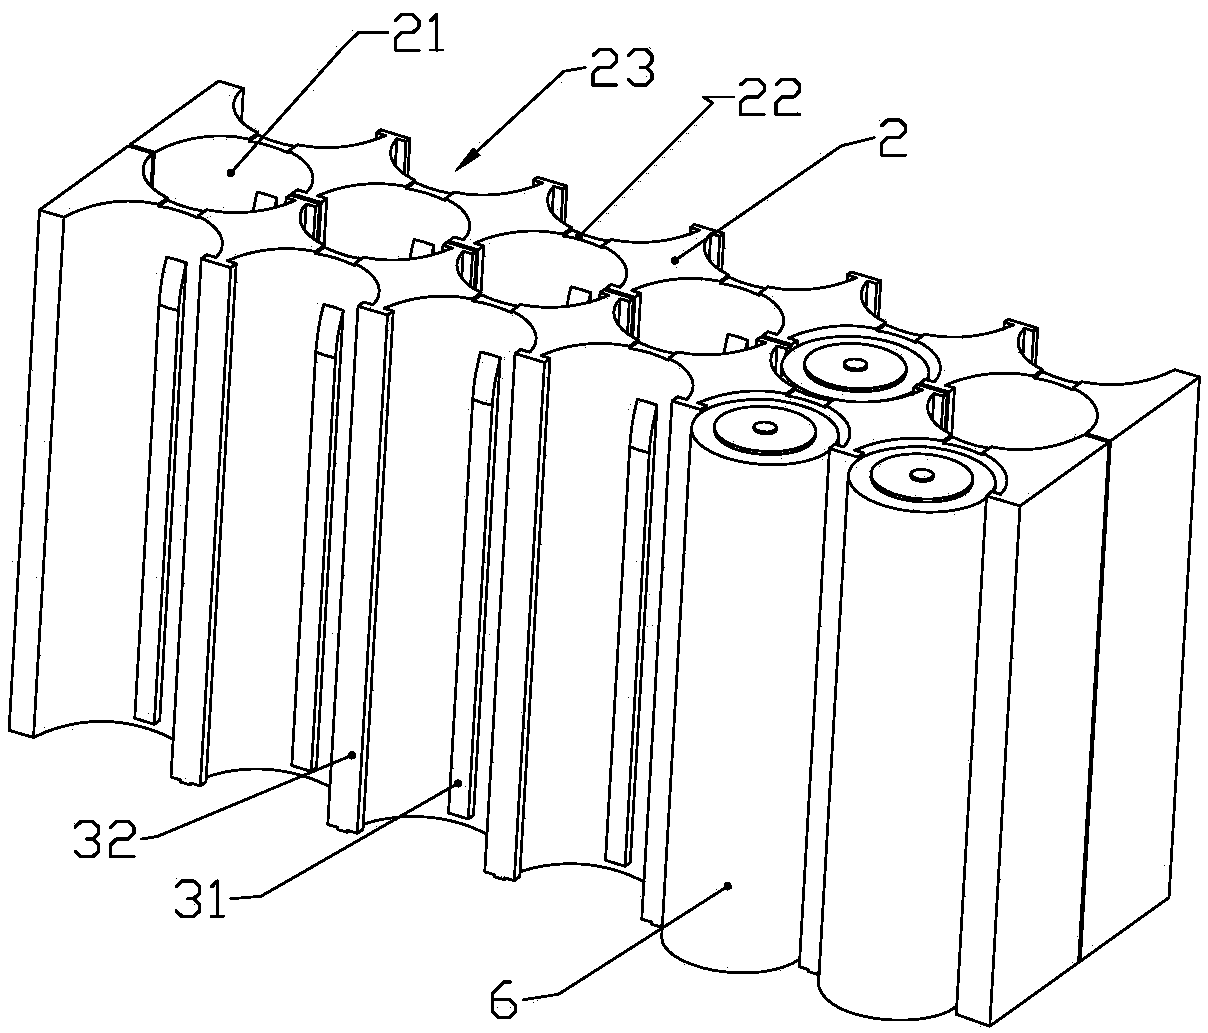 Cylindrical lithium cell bracket and power battery pack